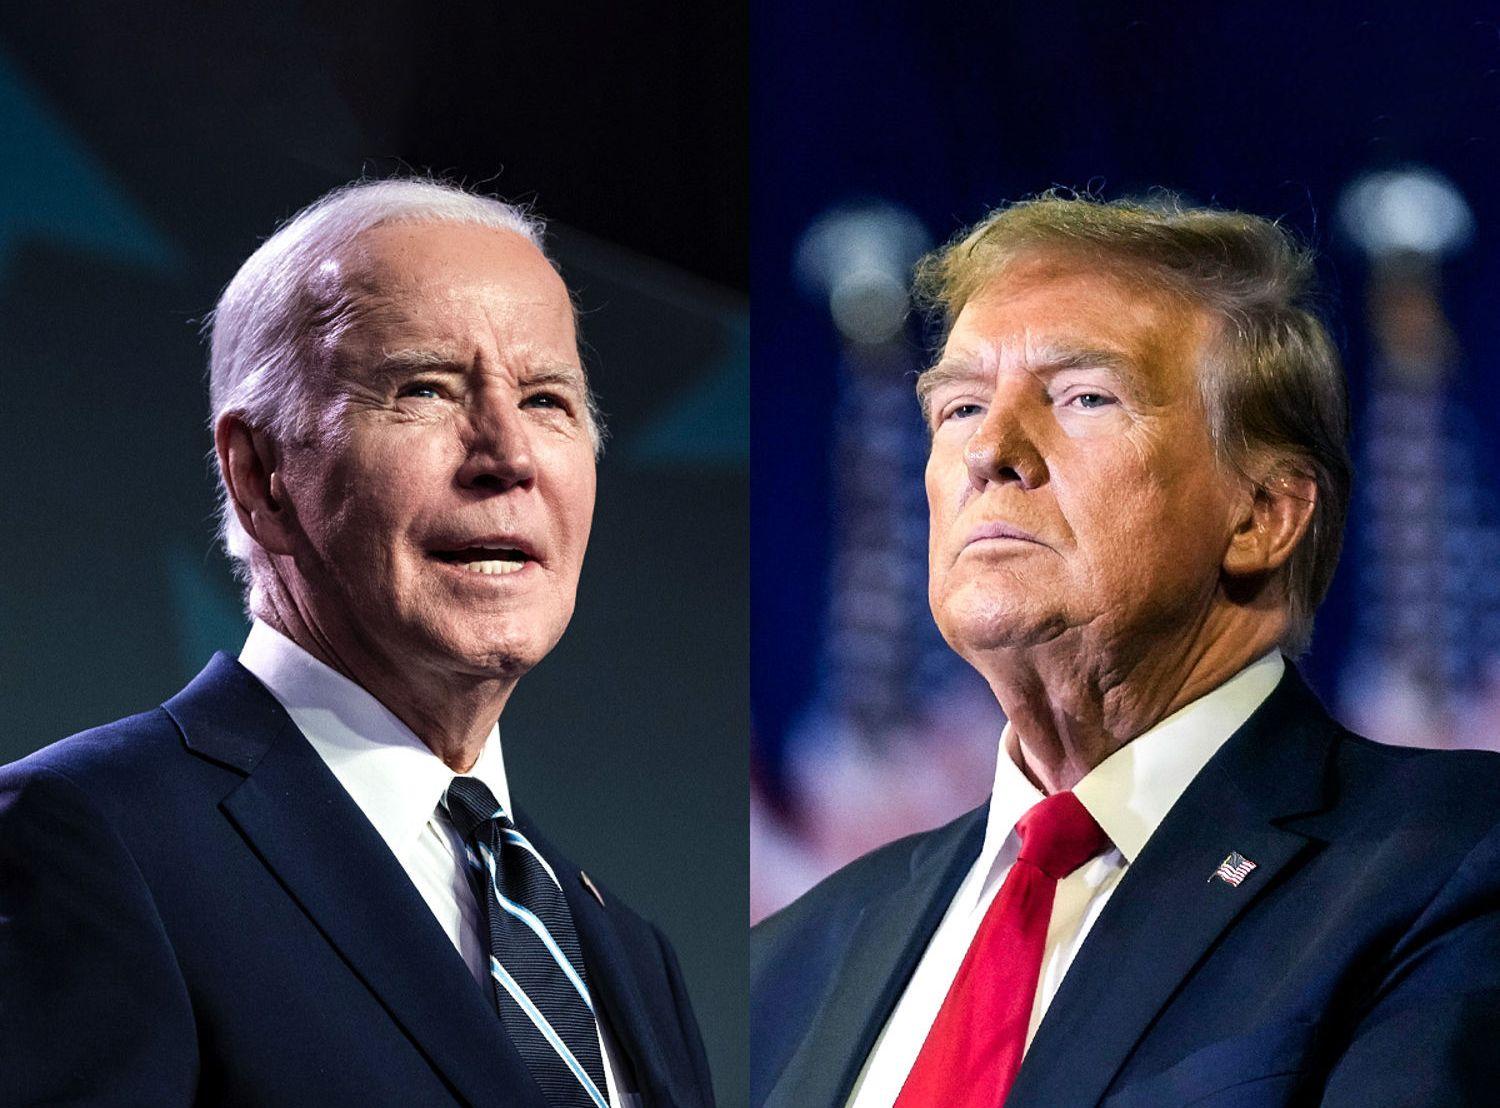 Trump and Biden won almost all primaries on "Super Tuesday"